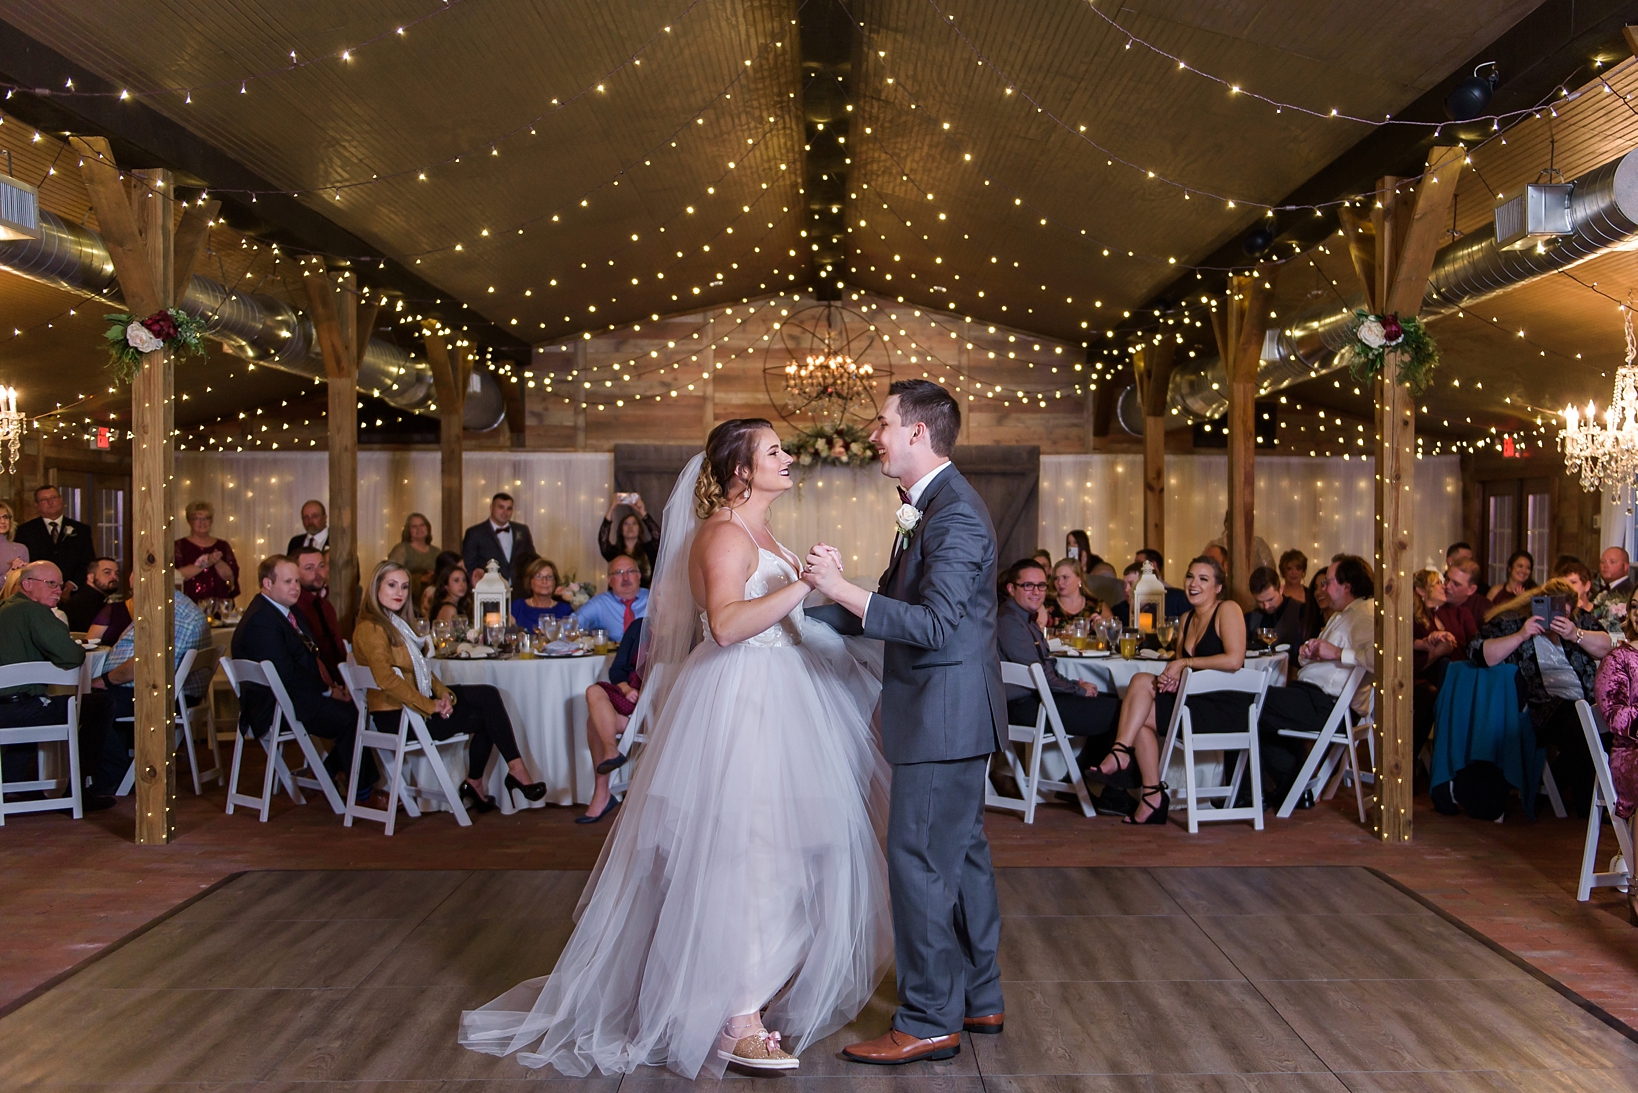 First Dance between Bride and Groom in a rustic barn with string lights